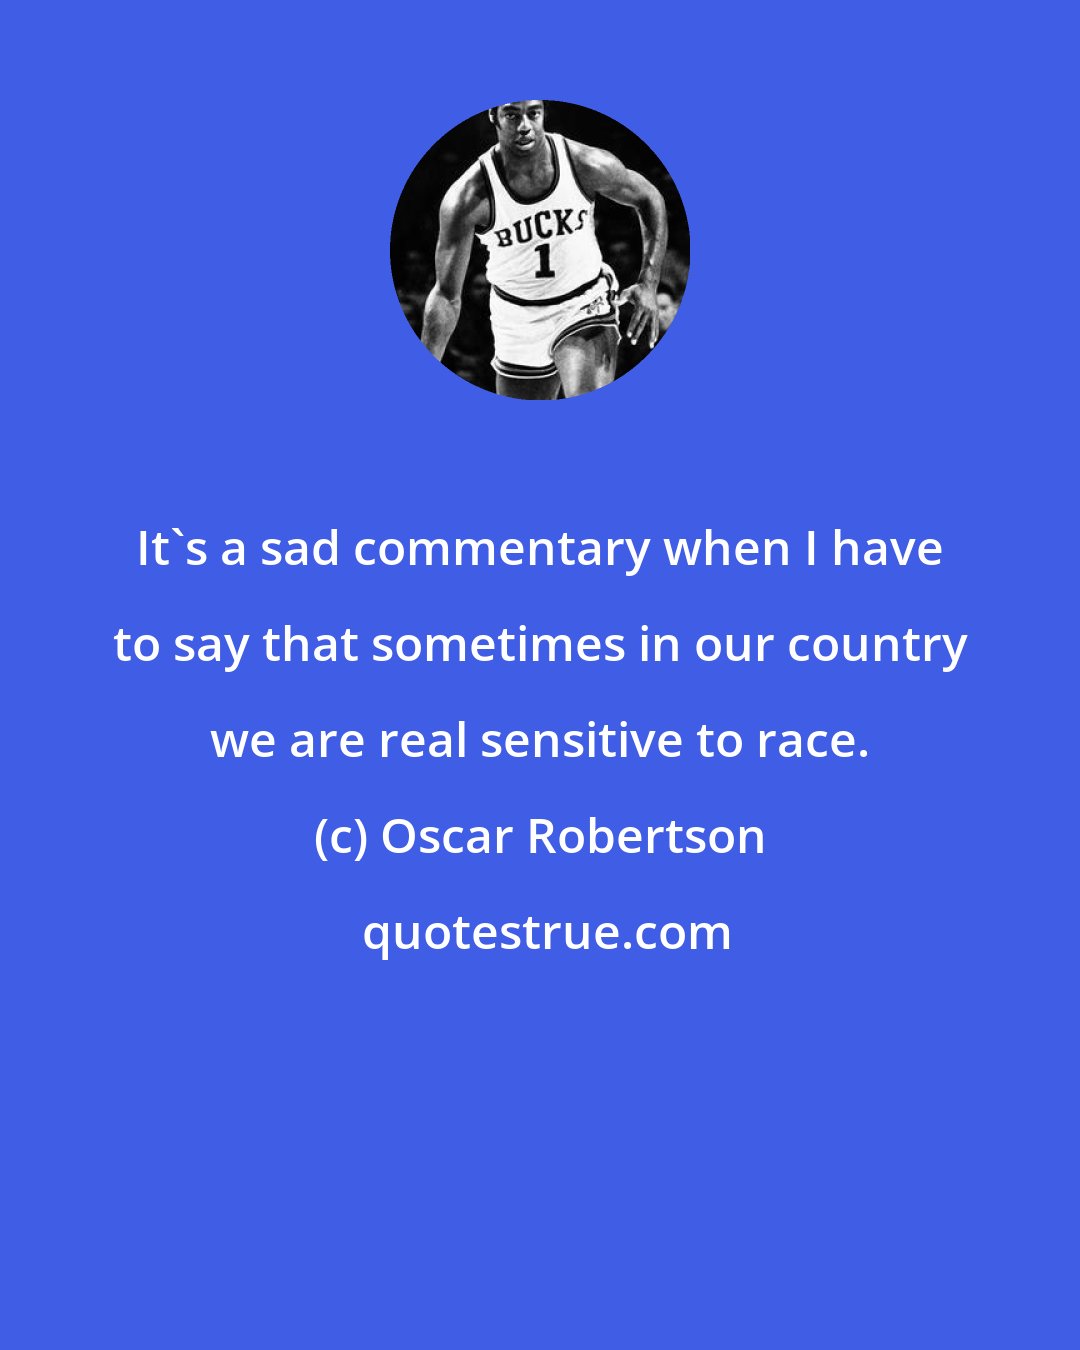 Oscar Robertson: It's a sad commentary when I have to say that sometimes in our country we are real sensitive to race.